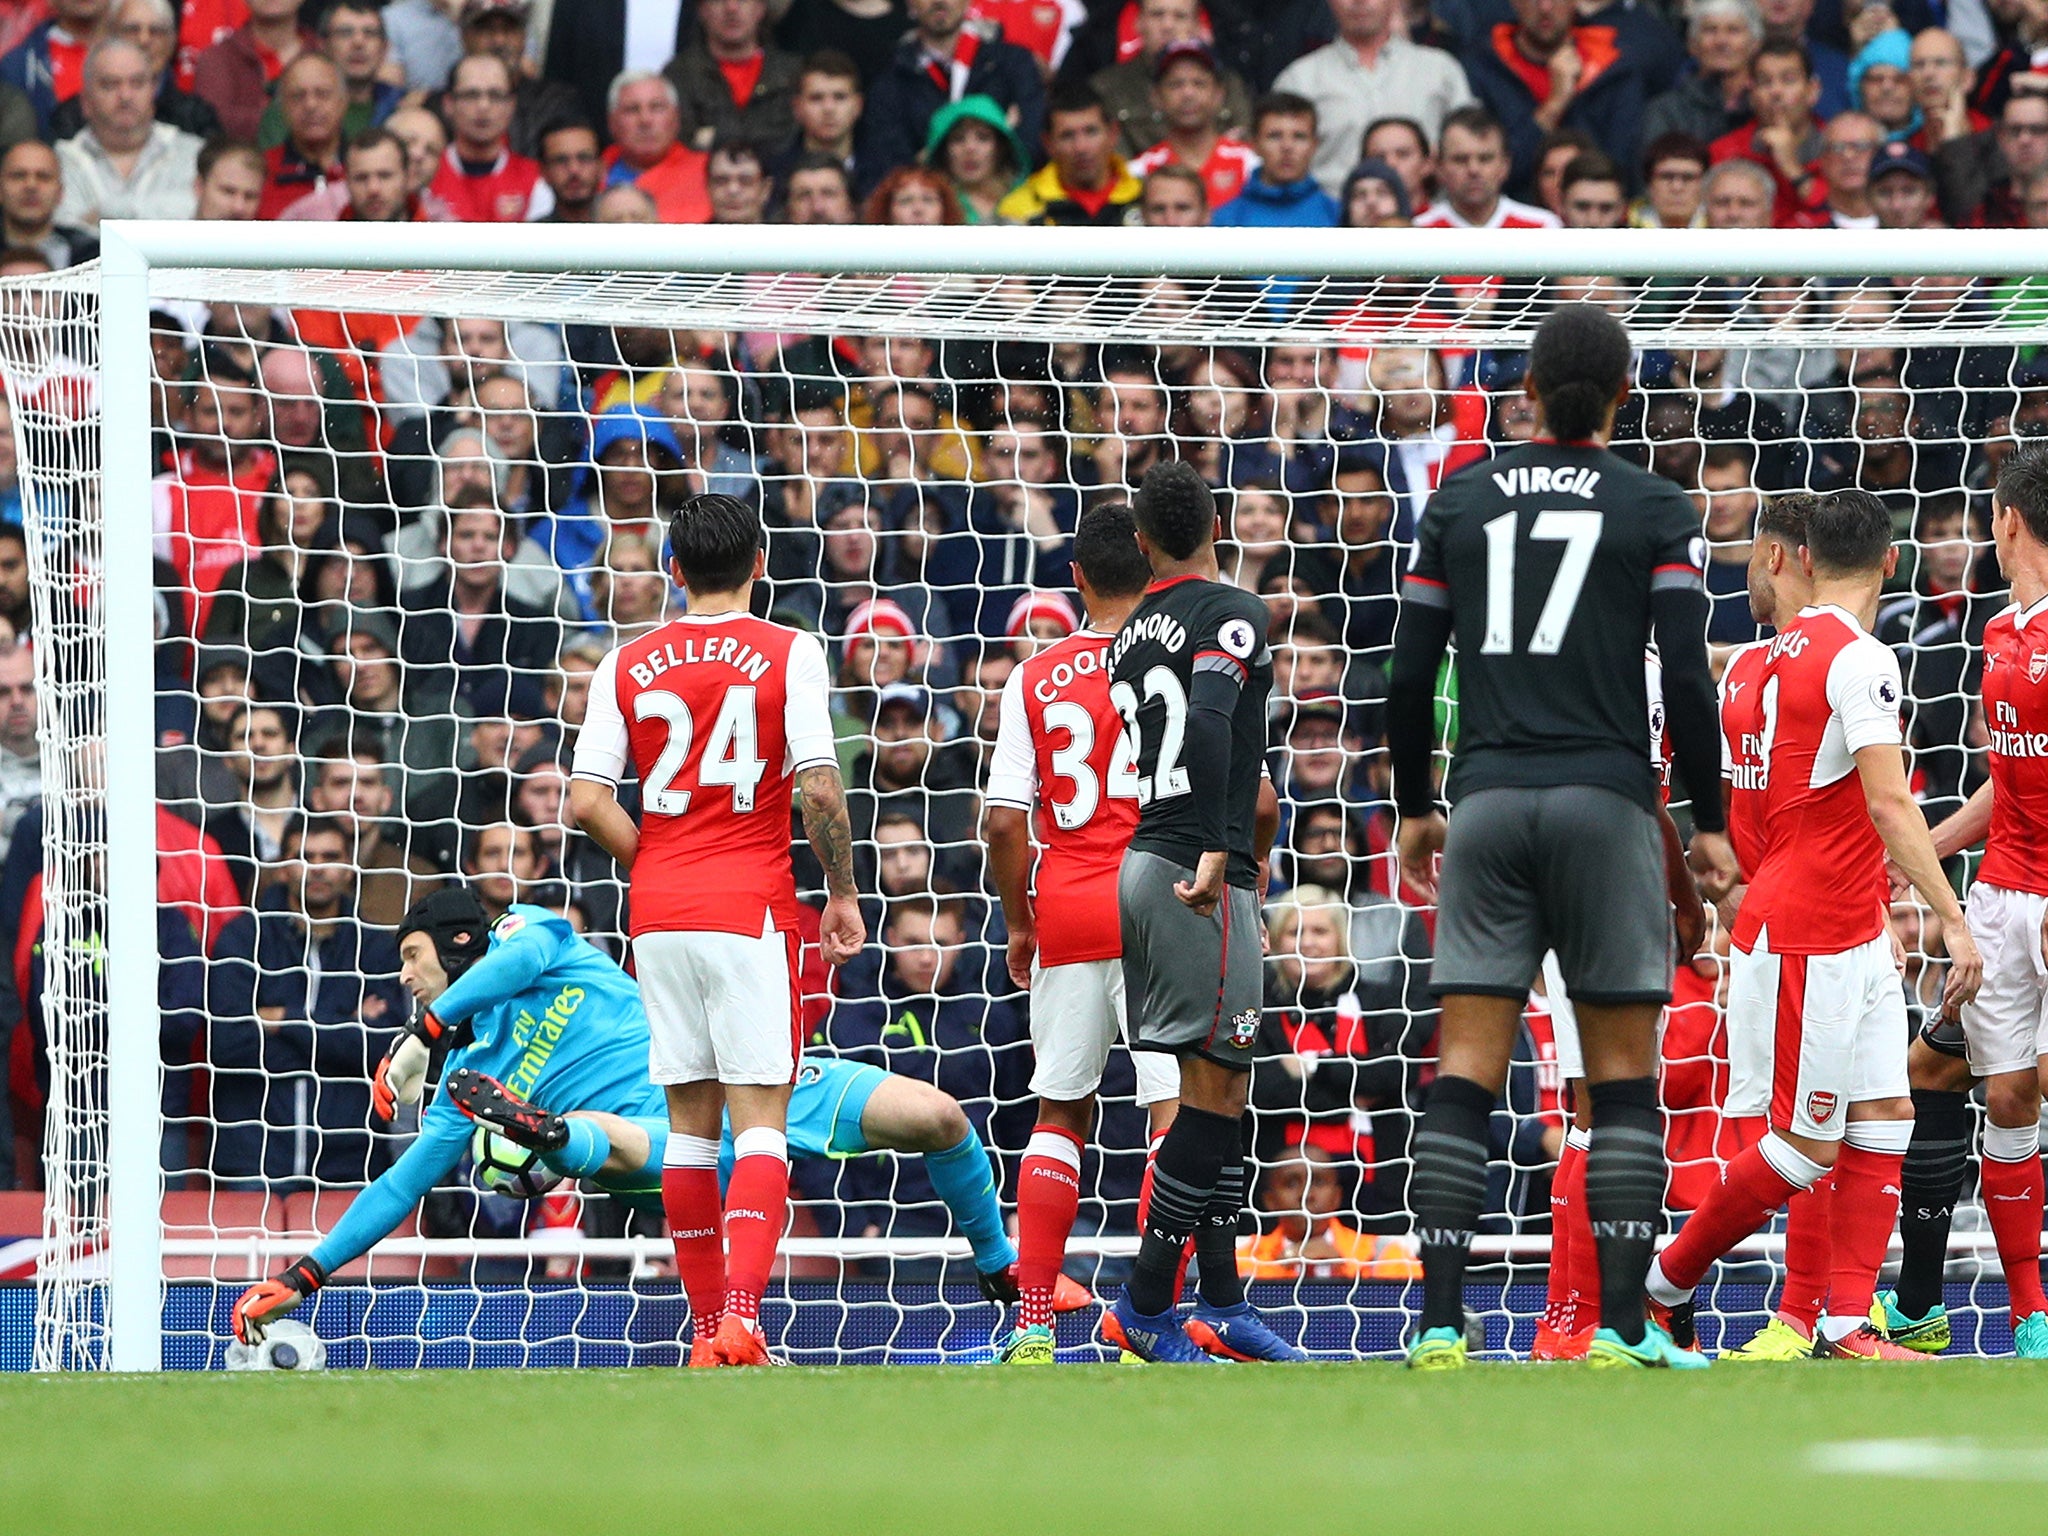 The visitors took an early lead when Cech deflected into his own goal